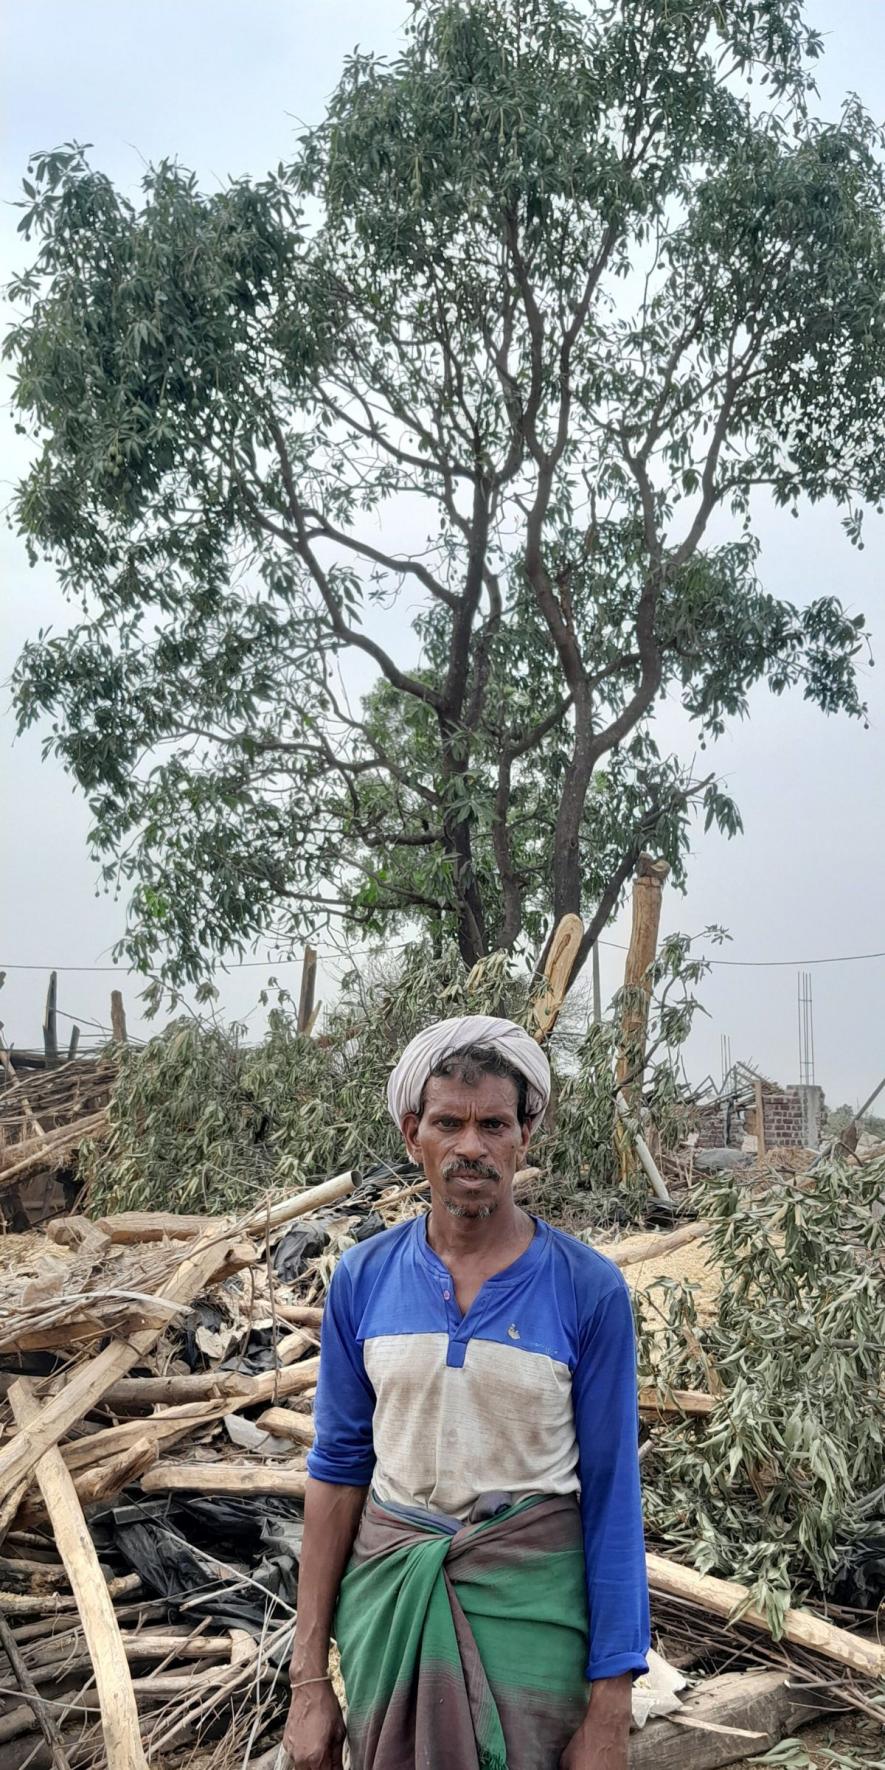 Standing in front of his gutted home, Vikram Gutram promises to rebuild. The mango tree behind him was planted and nurtured by him from seed (Photo - Mohammad Asif Siddiqui, 101Reporters).